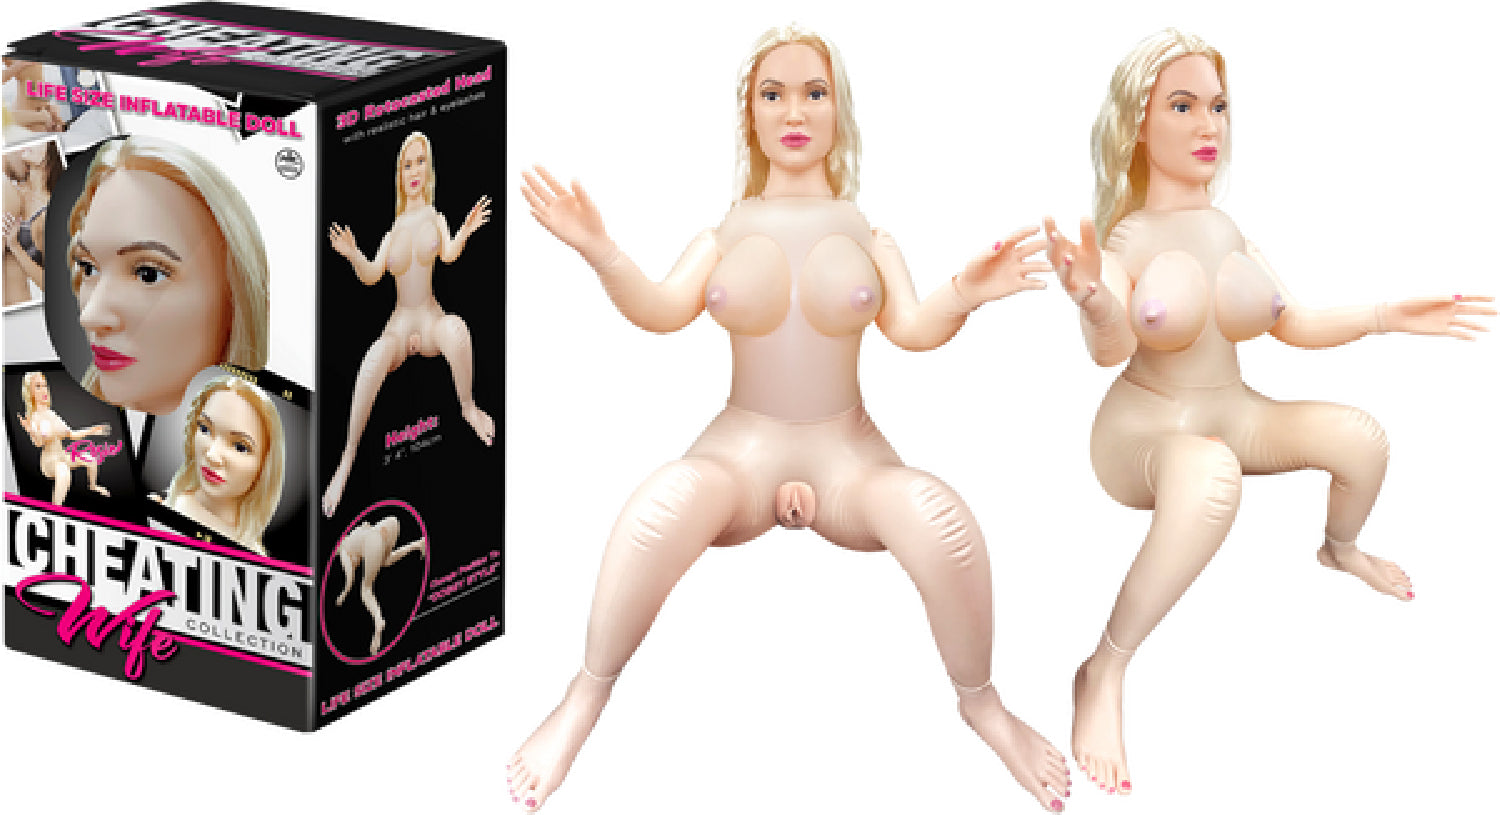 Cheating Wife Collection - Rosie Lifesize Inflatable Doll - Flesh